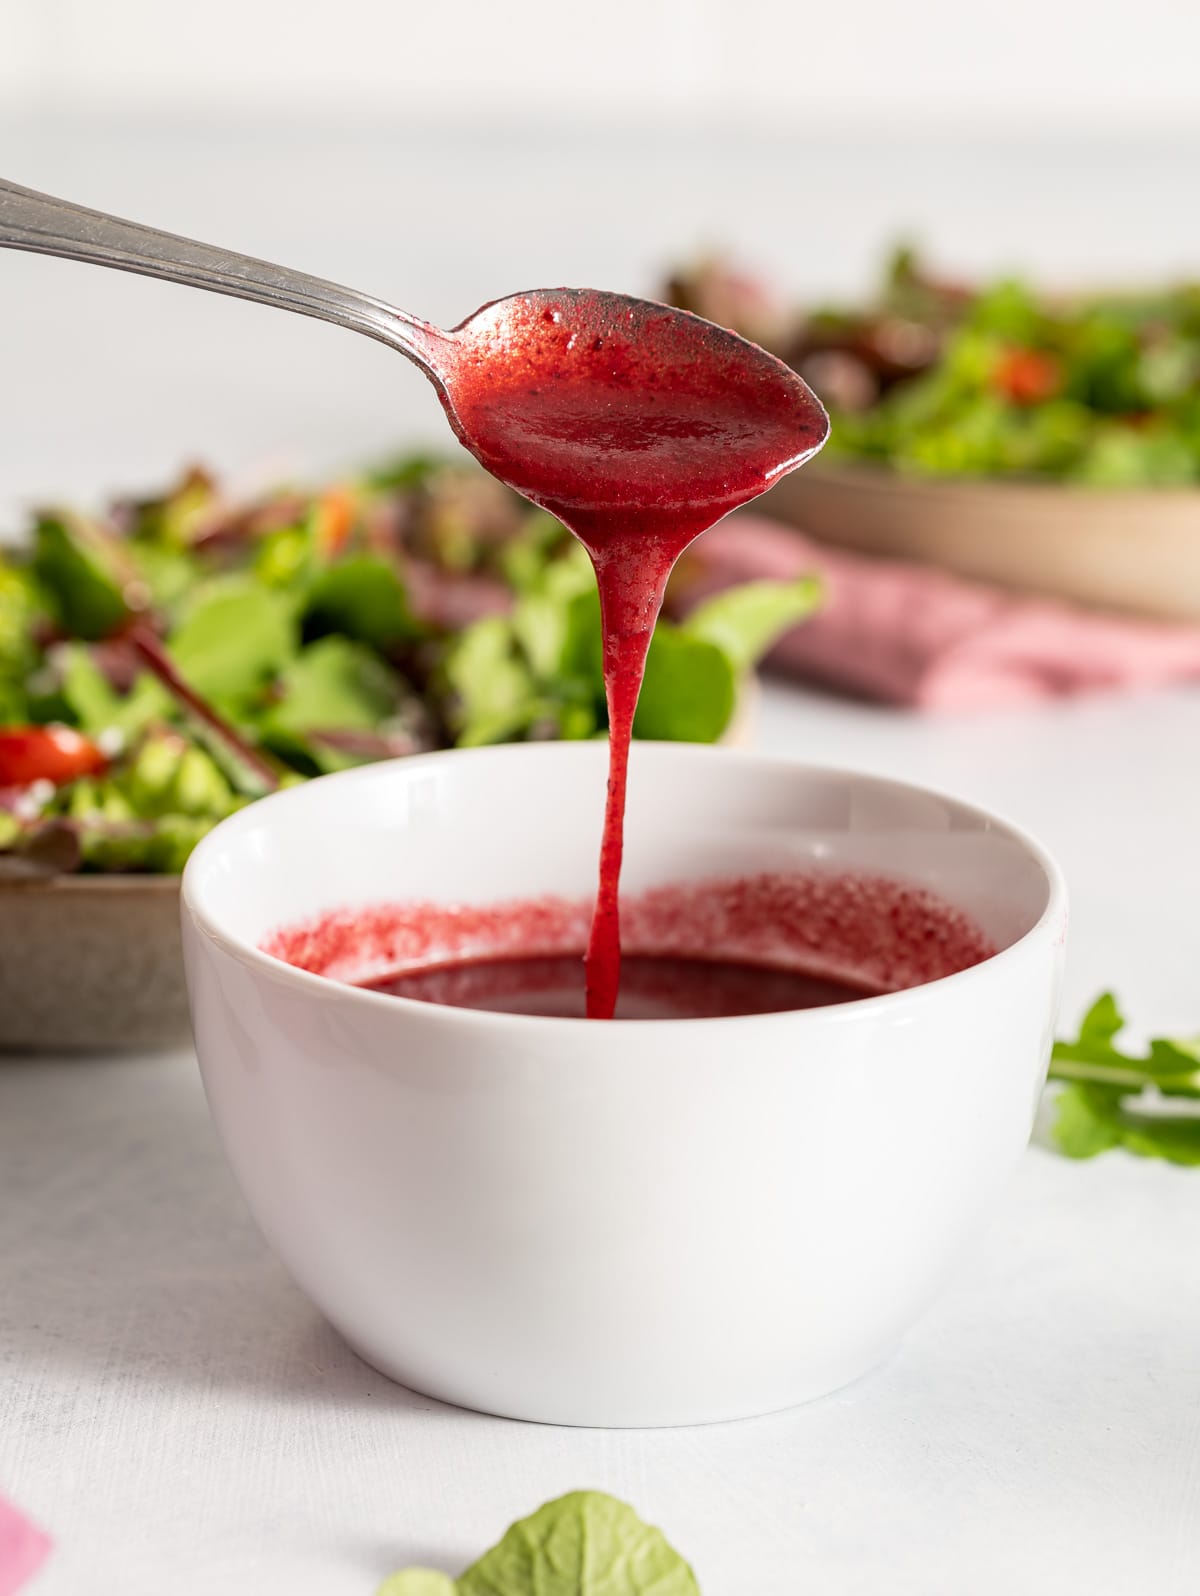 spoonful of dark red vinaigrette dressing being poured into a white bowl